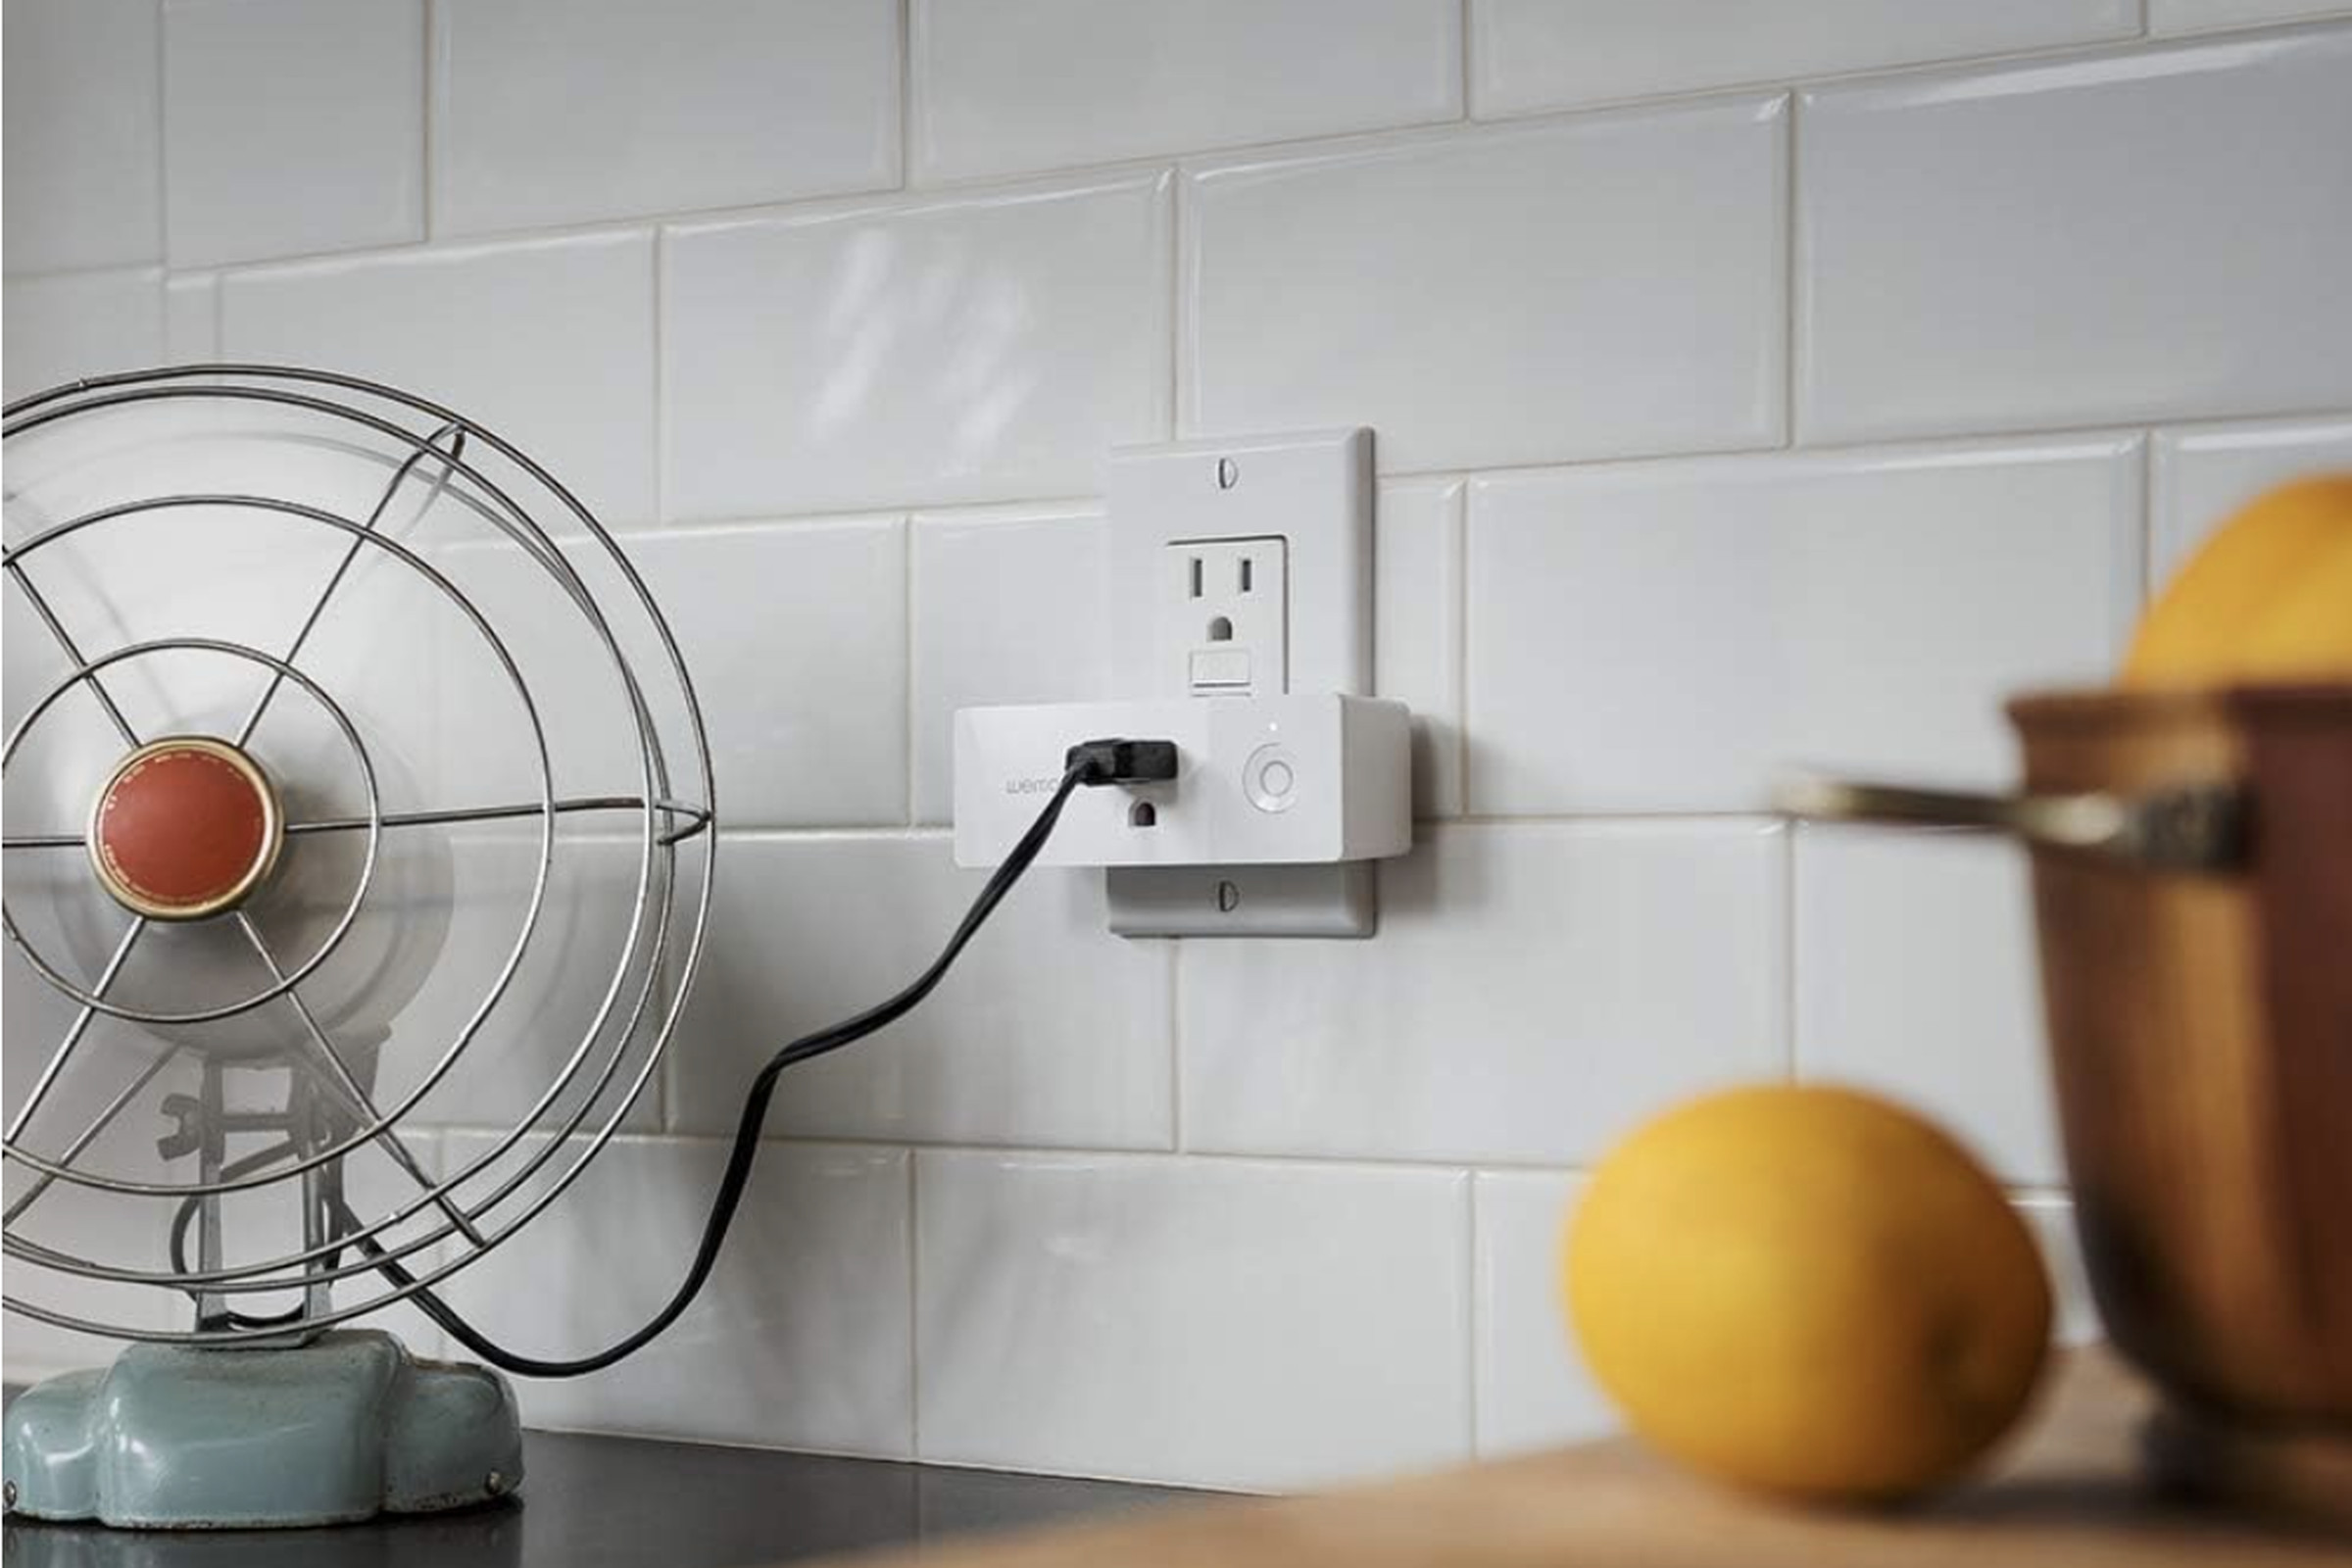 Fan plugged into smart plug on kitchen counter.